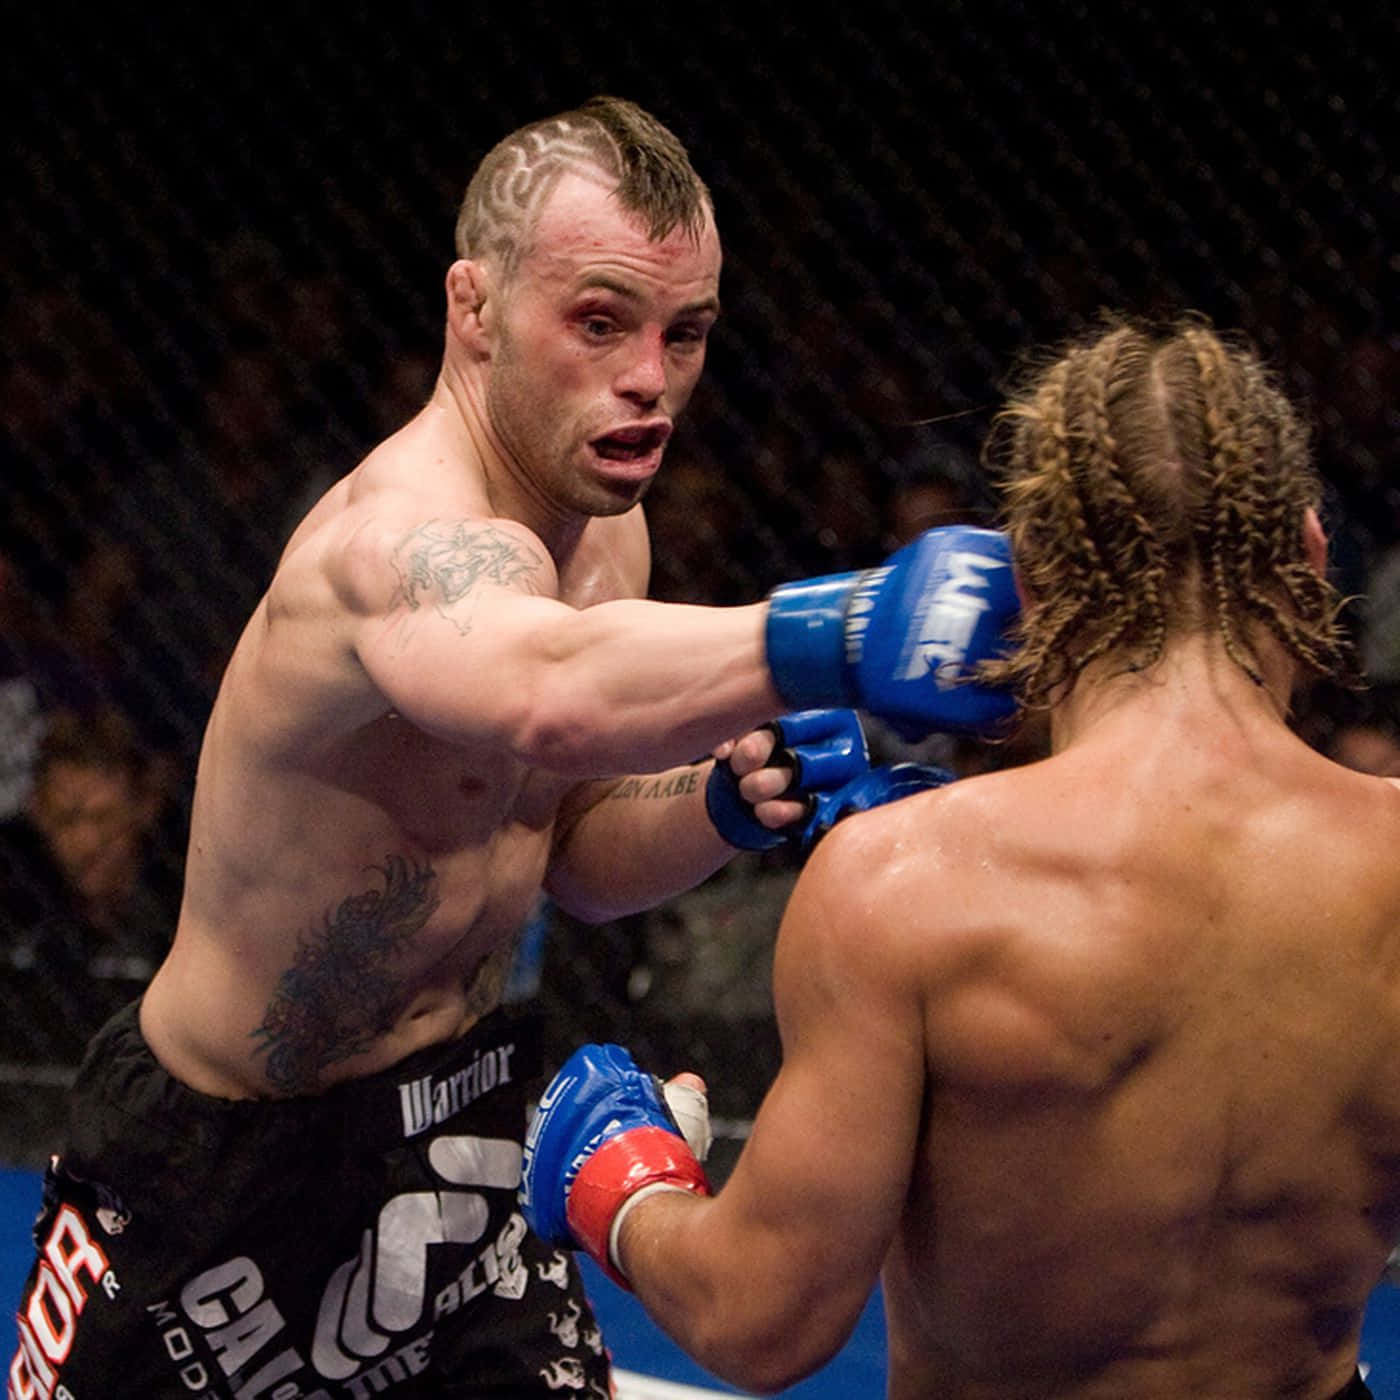 MMA Fighter Jens Pulver And Urijah Faber Wallpaper